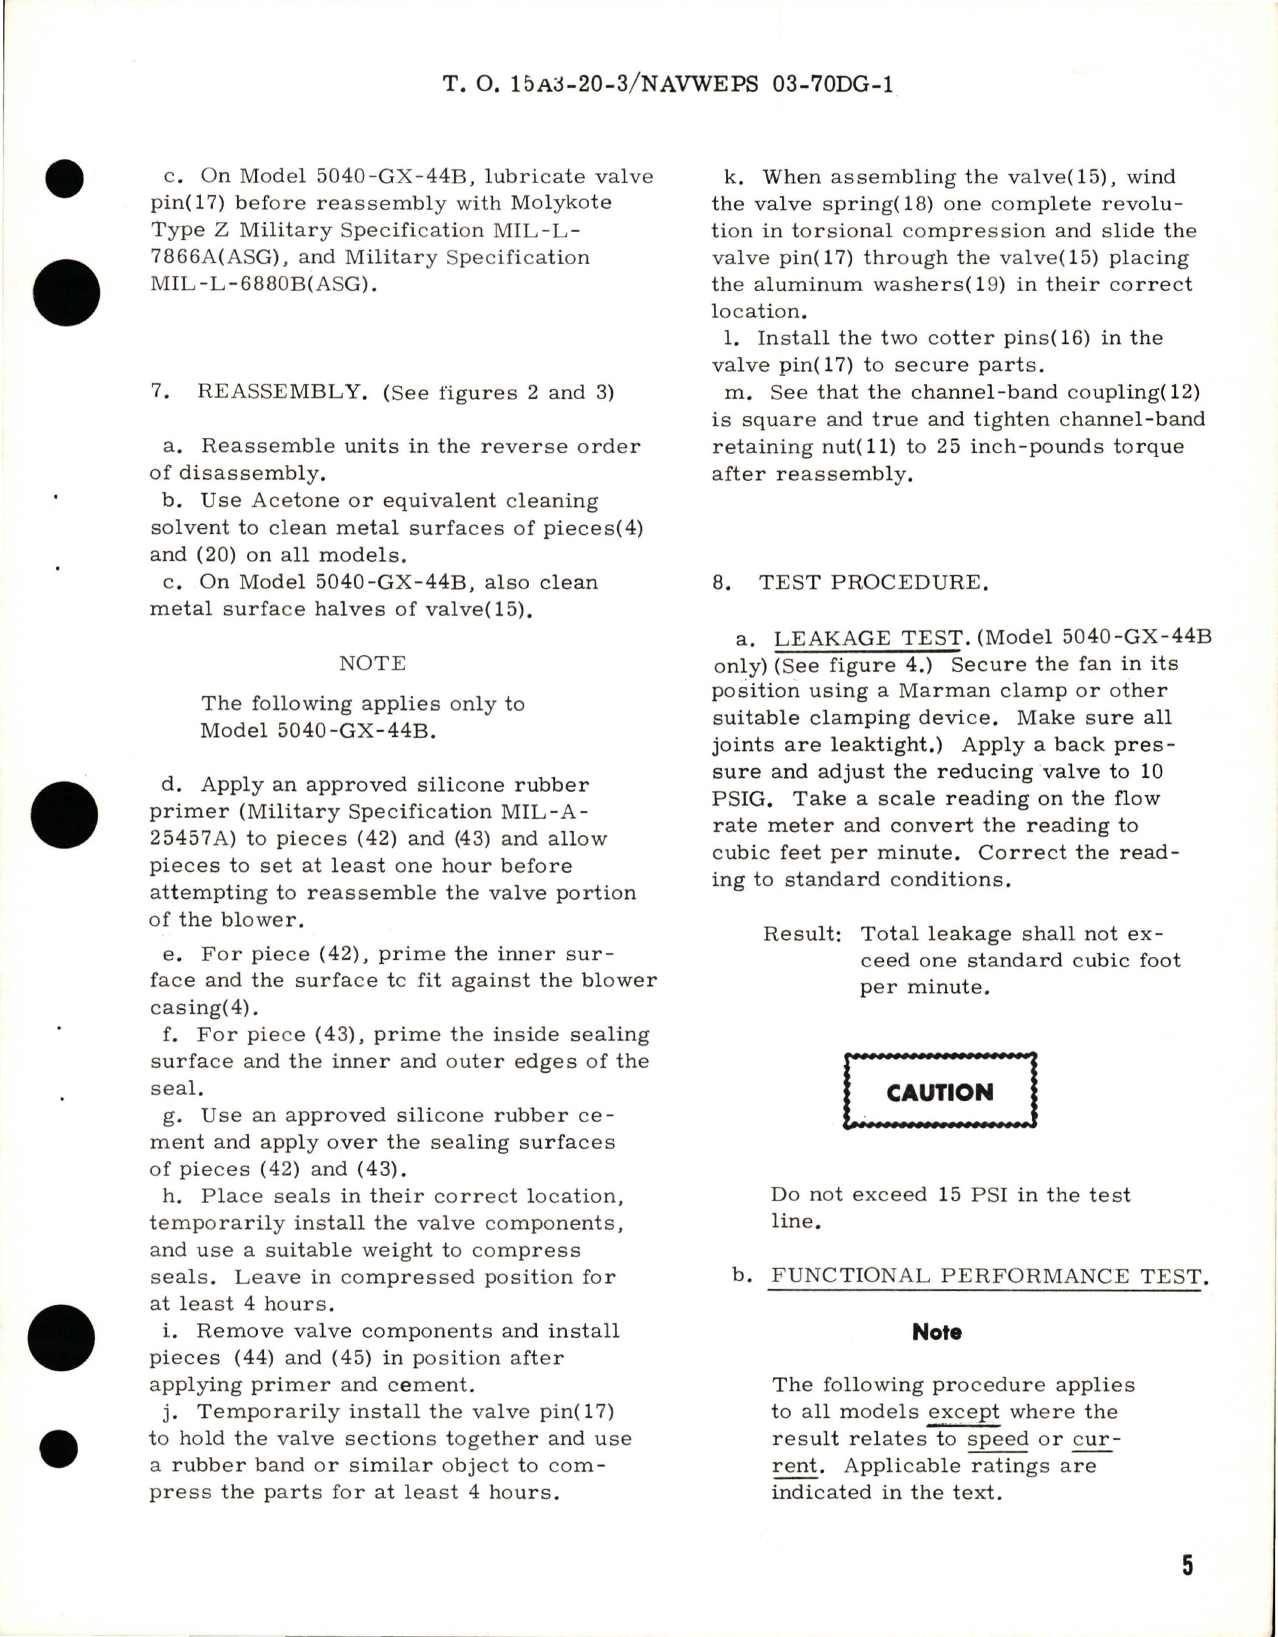 Sample page 5 from AirCorps Library document: Overhaul Instructions with Parts Breakdown for Blower Assembly 